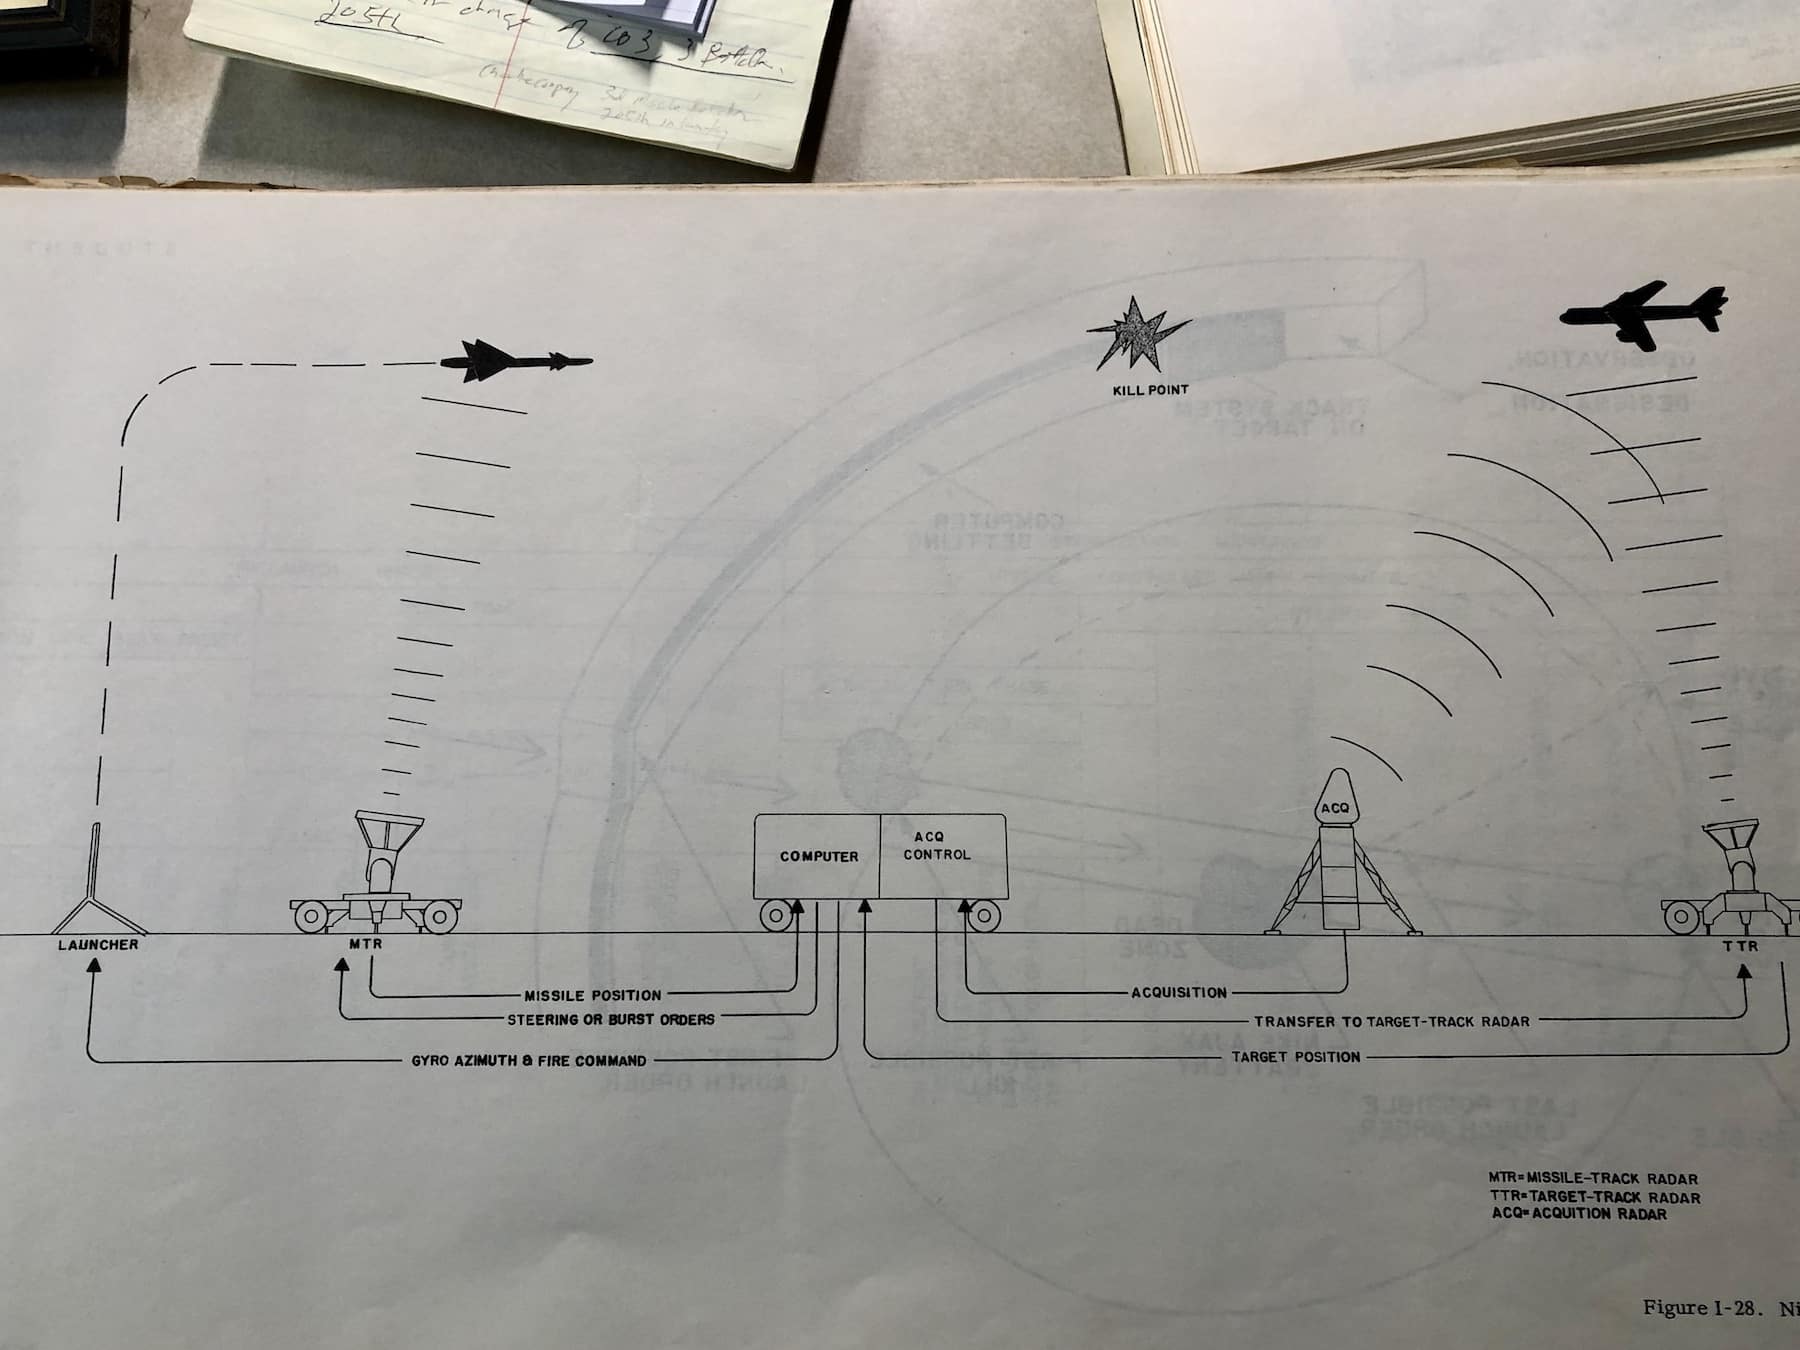 A page from a 1957 training manual shows the three different radars that were part of the Nike missile system.